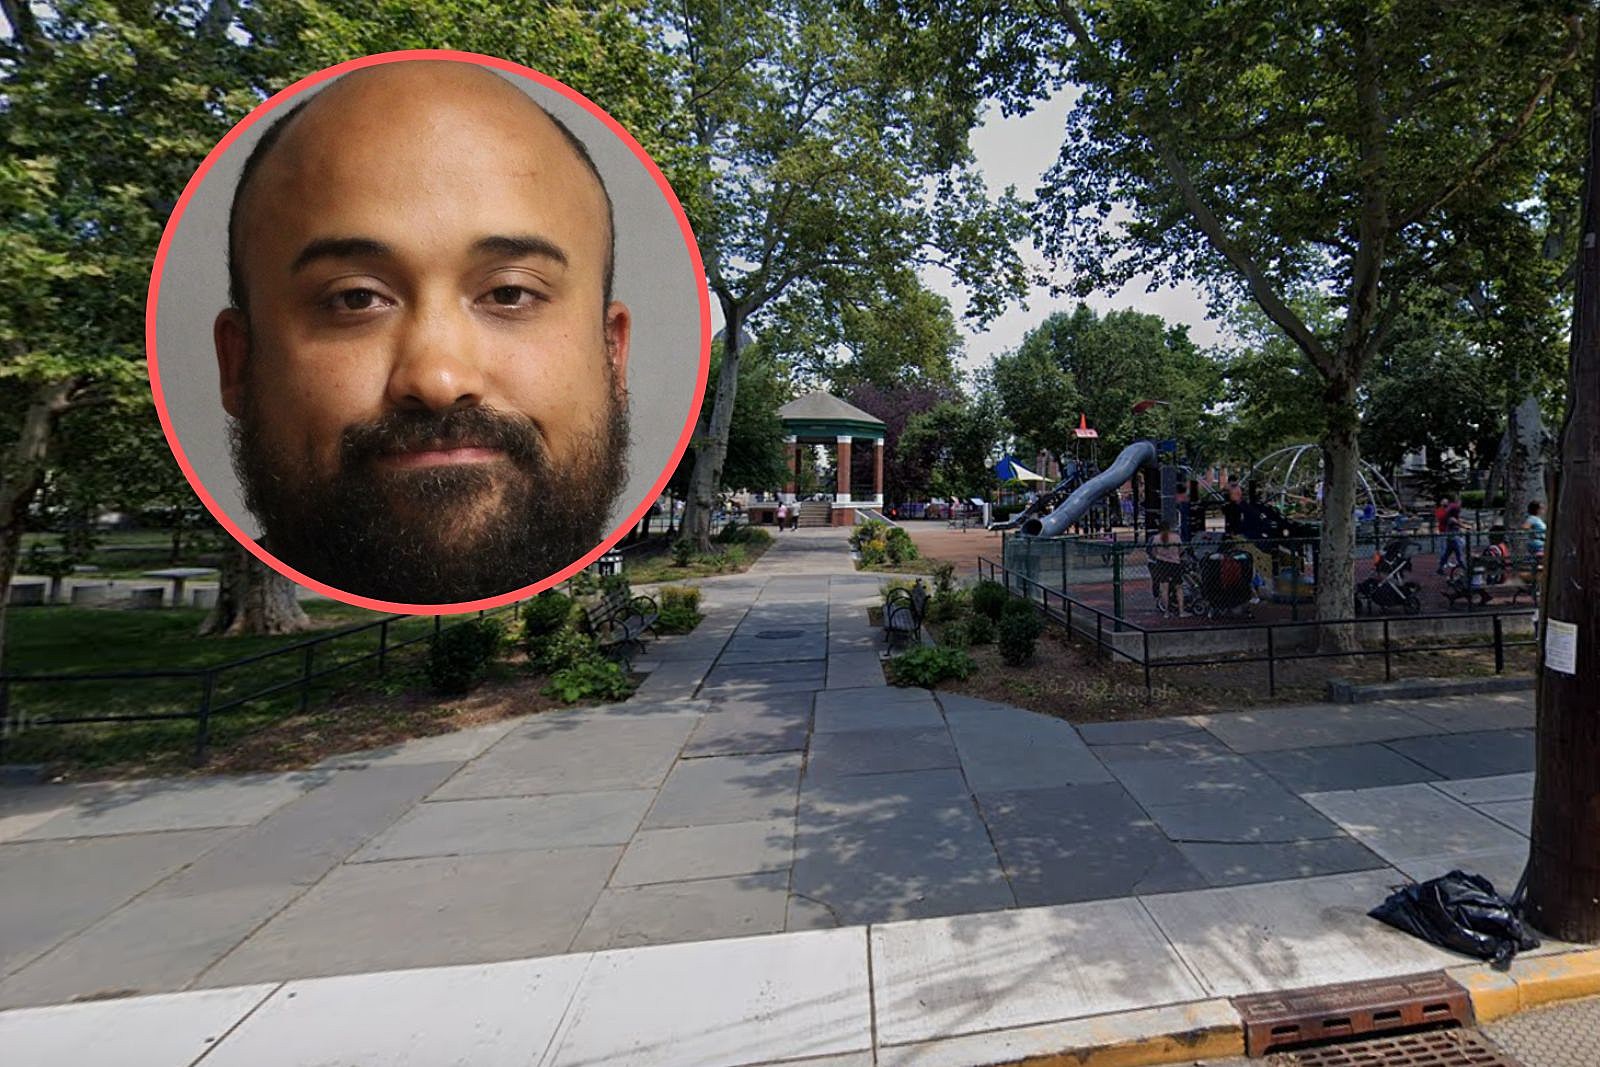 Hoboken NJ park where man arrested deals with homelessness issues